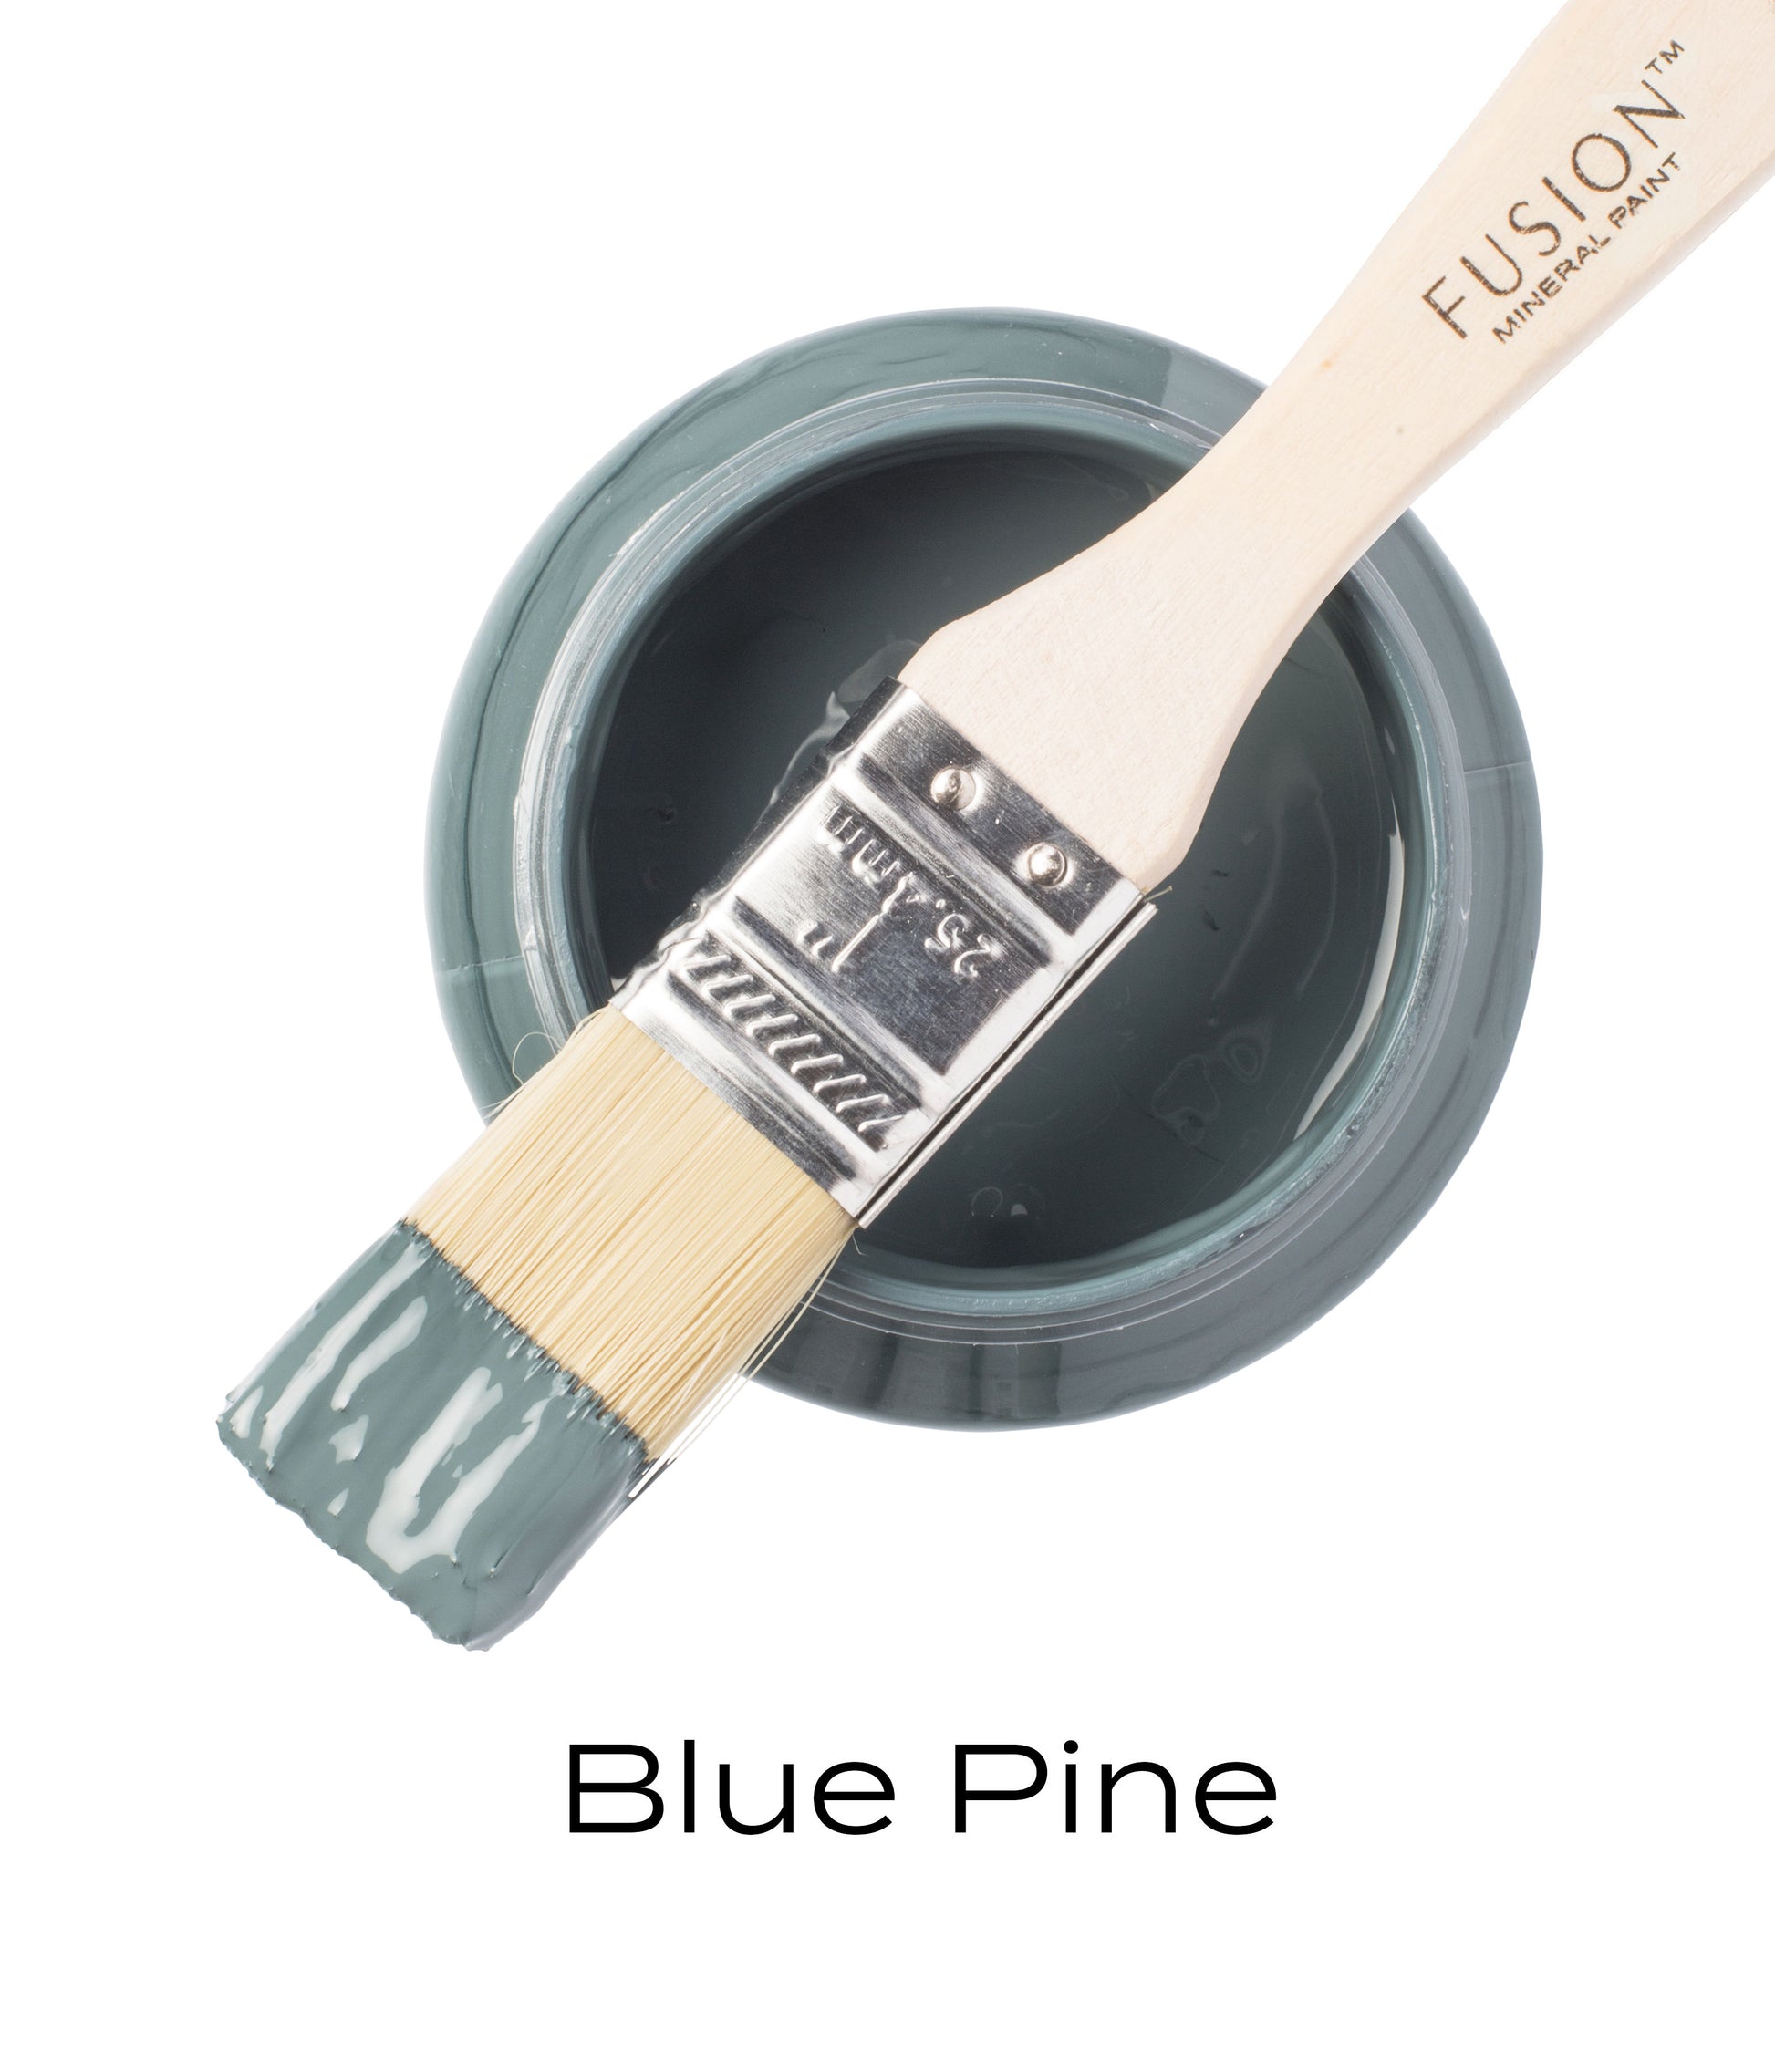 Blue Pine Fusion Mineral Paint Buy Online